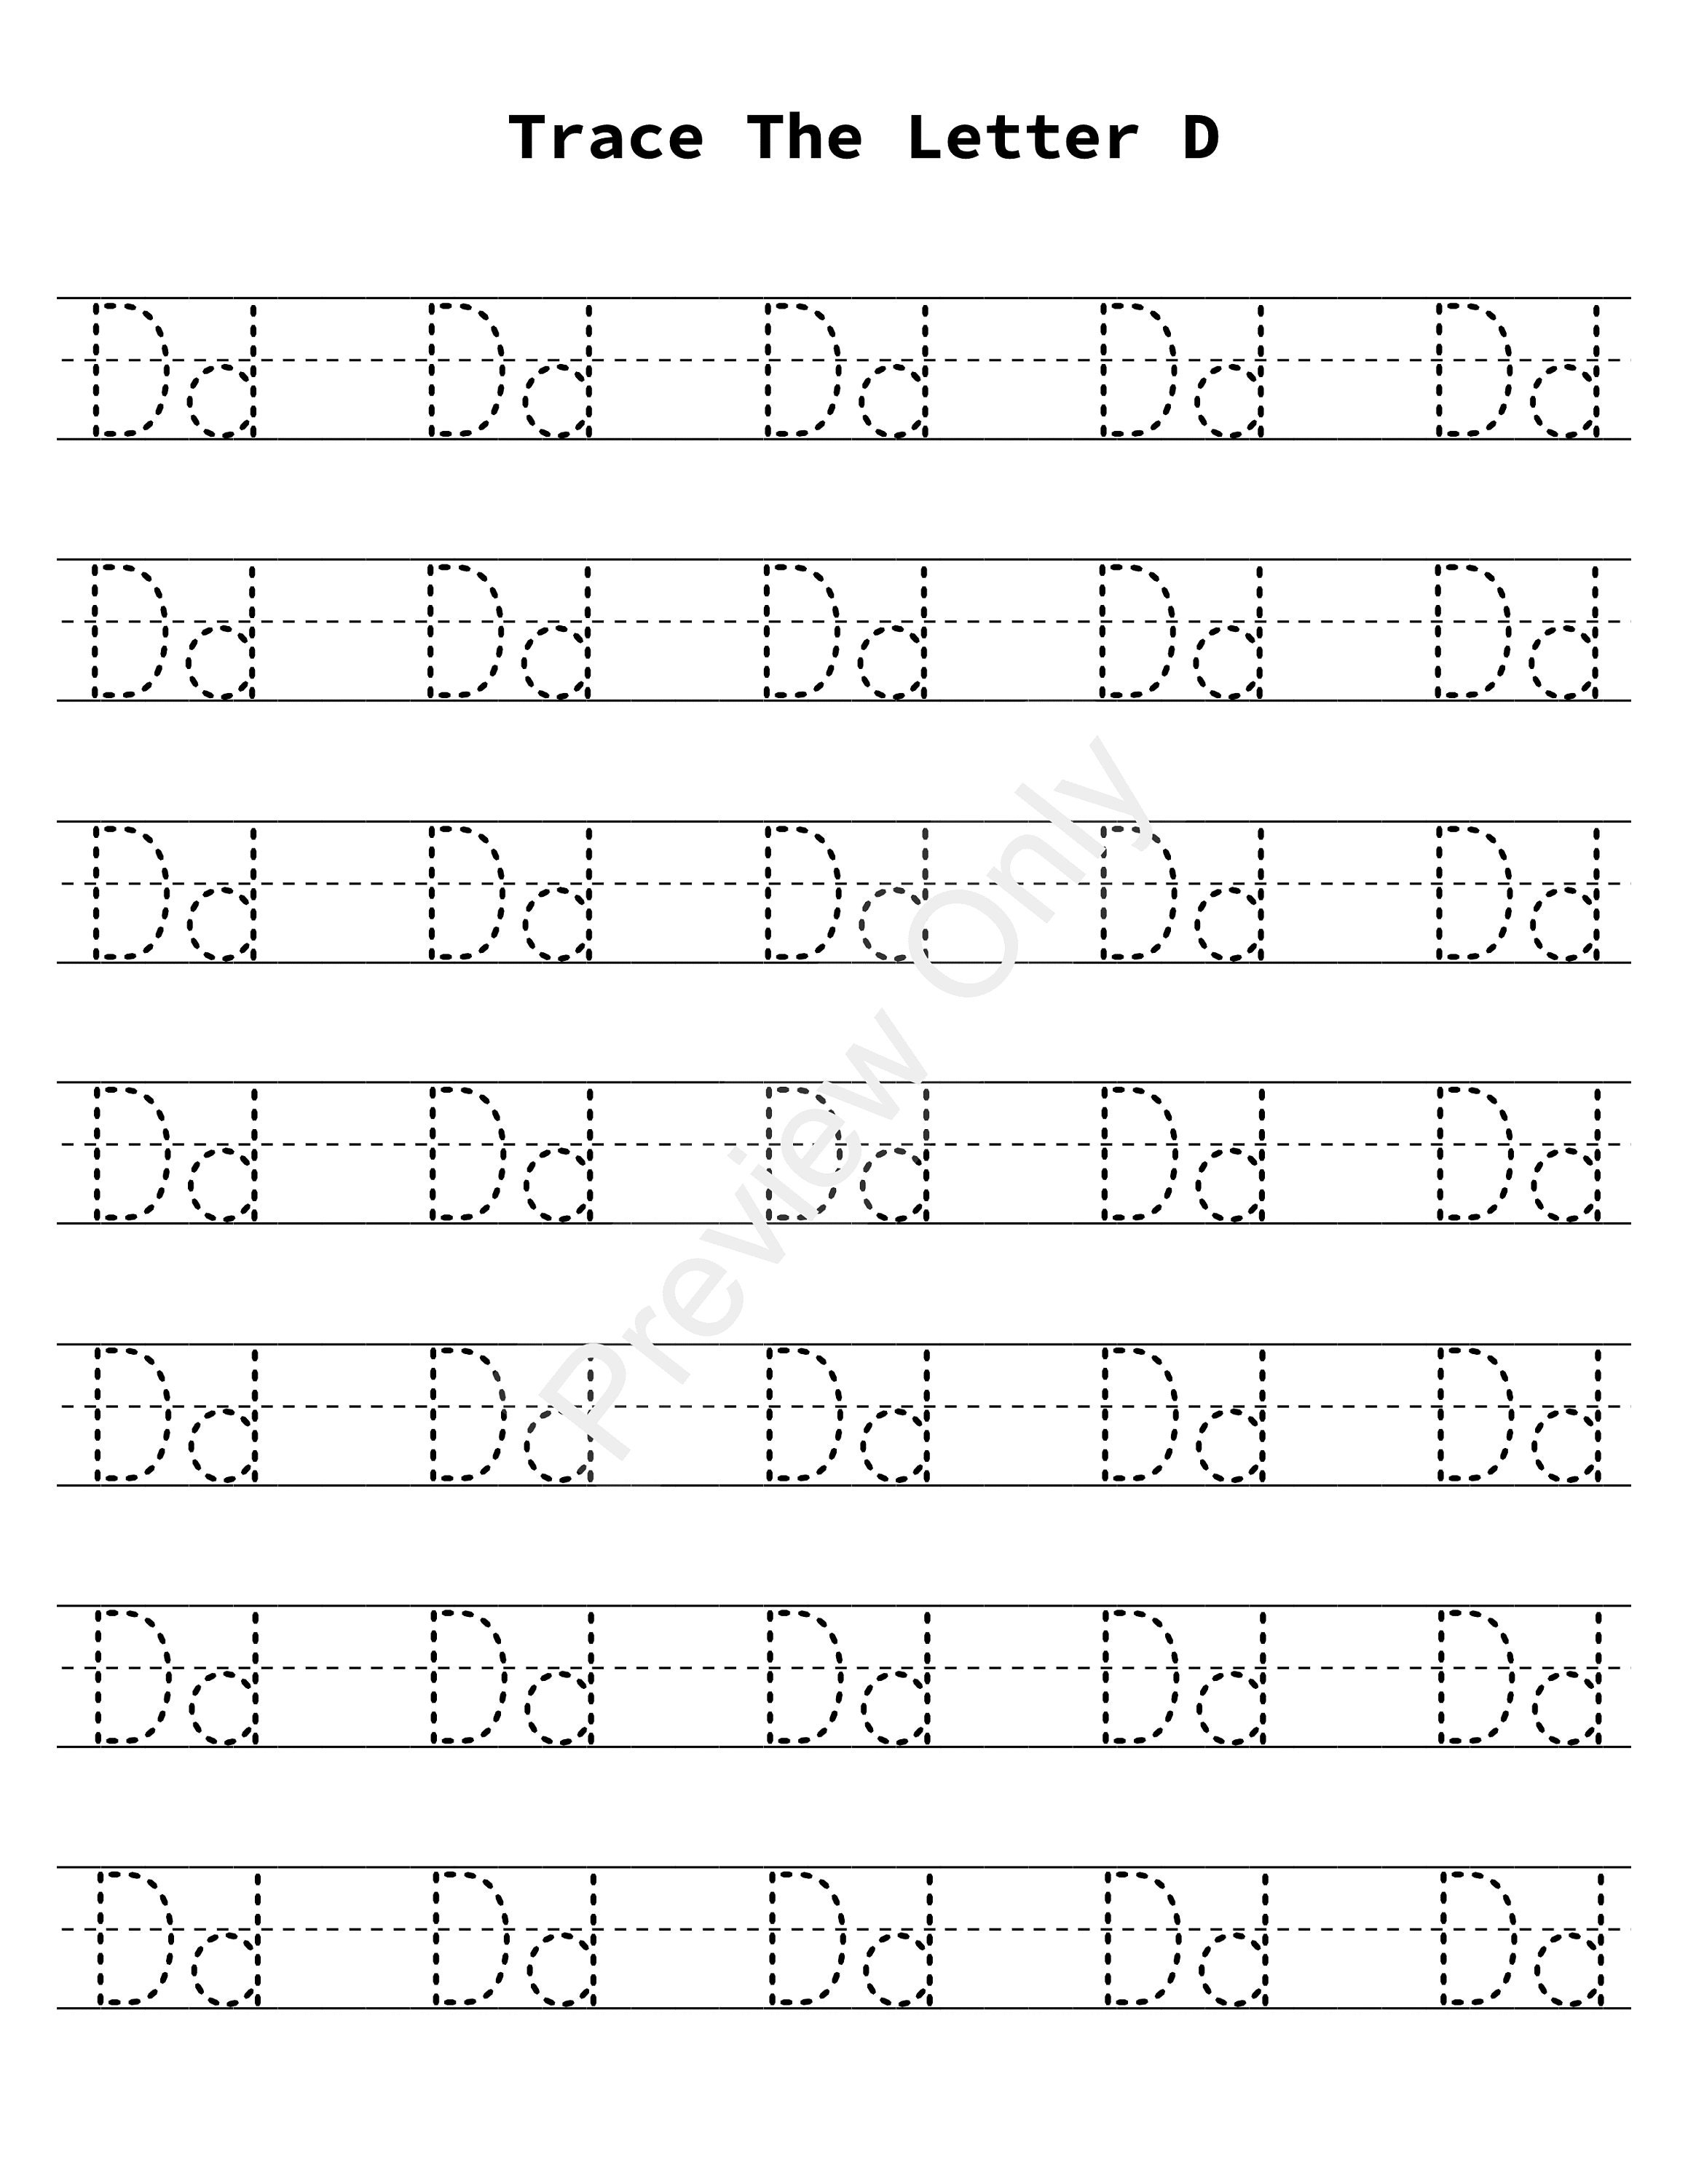 26 Printable Trace the Alphabet Worksheets. ABC Handwriting - Etsy ...